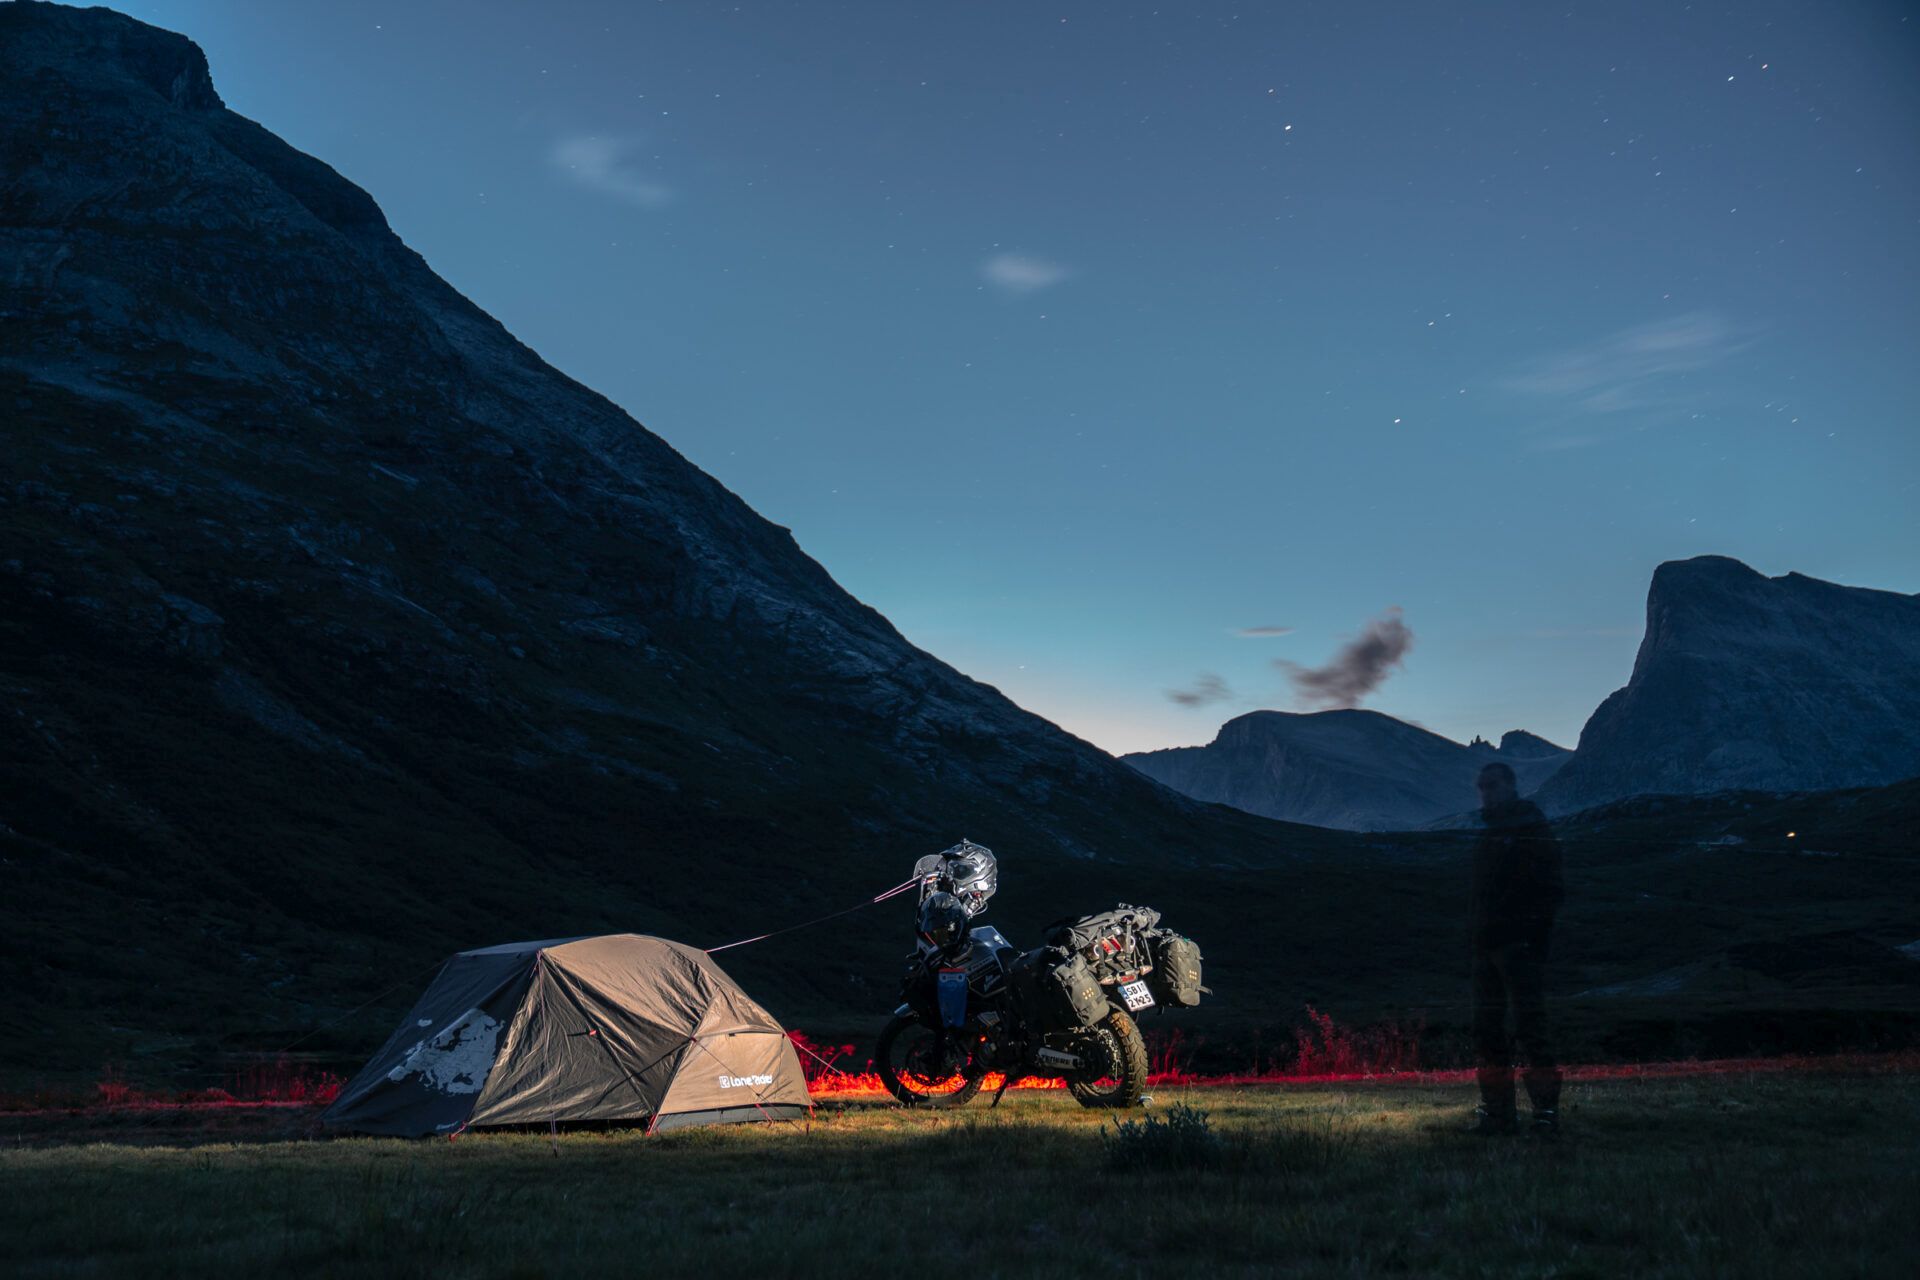 Norway night camp with tent and motorcycle